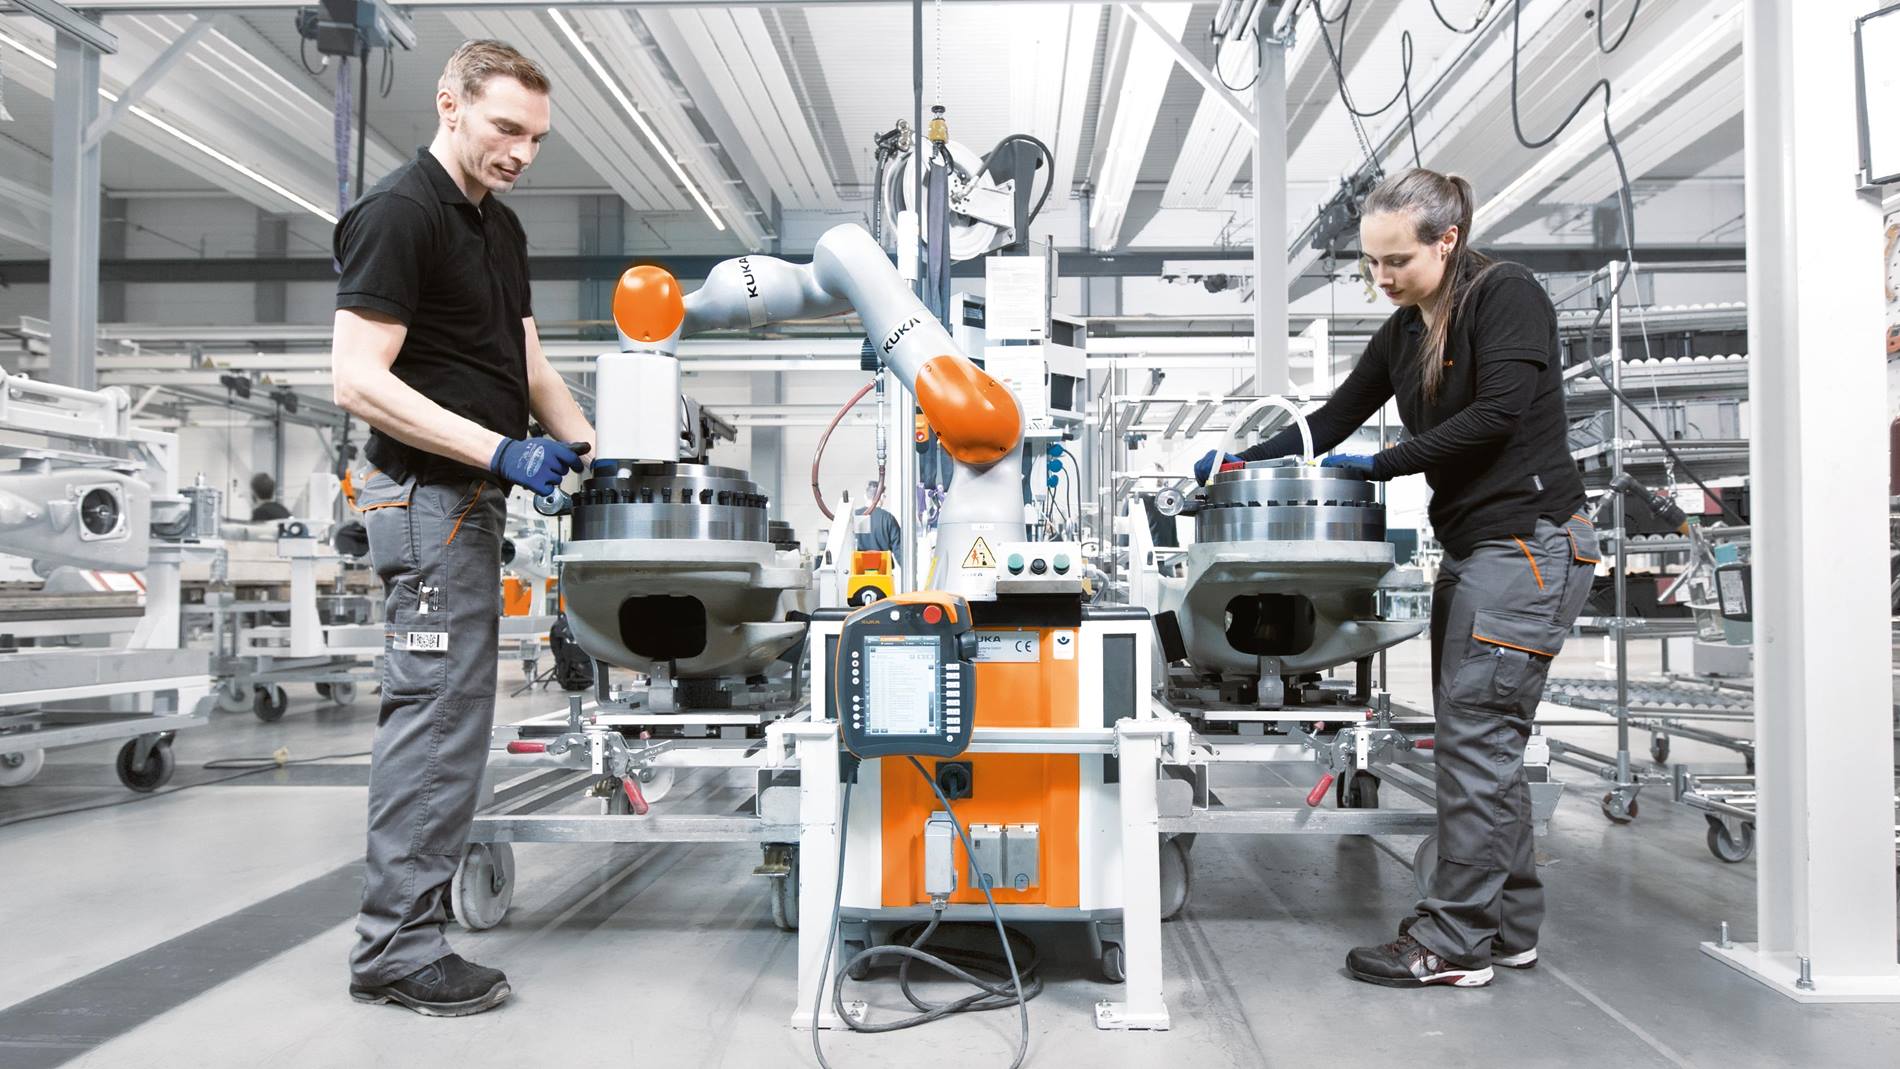 KUKA employees are supported by FlexFellow